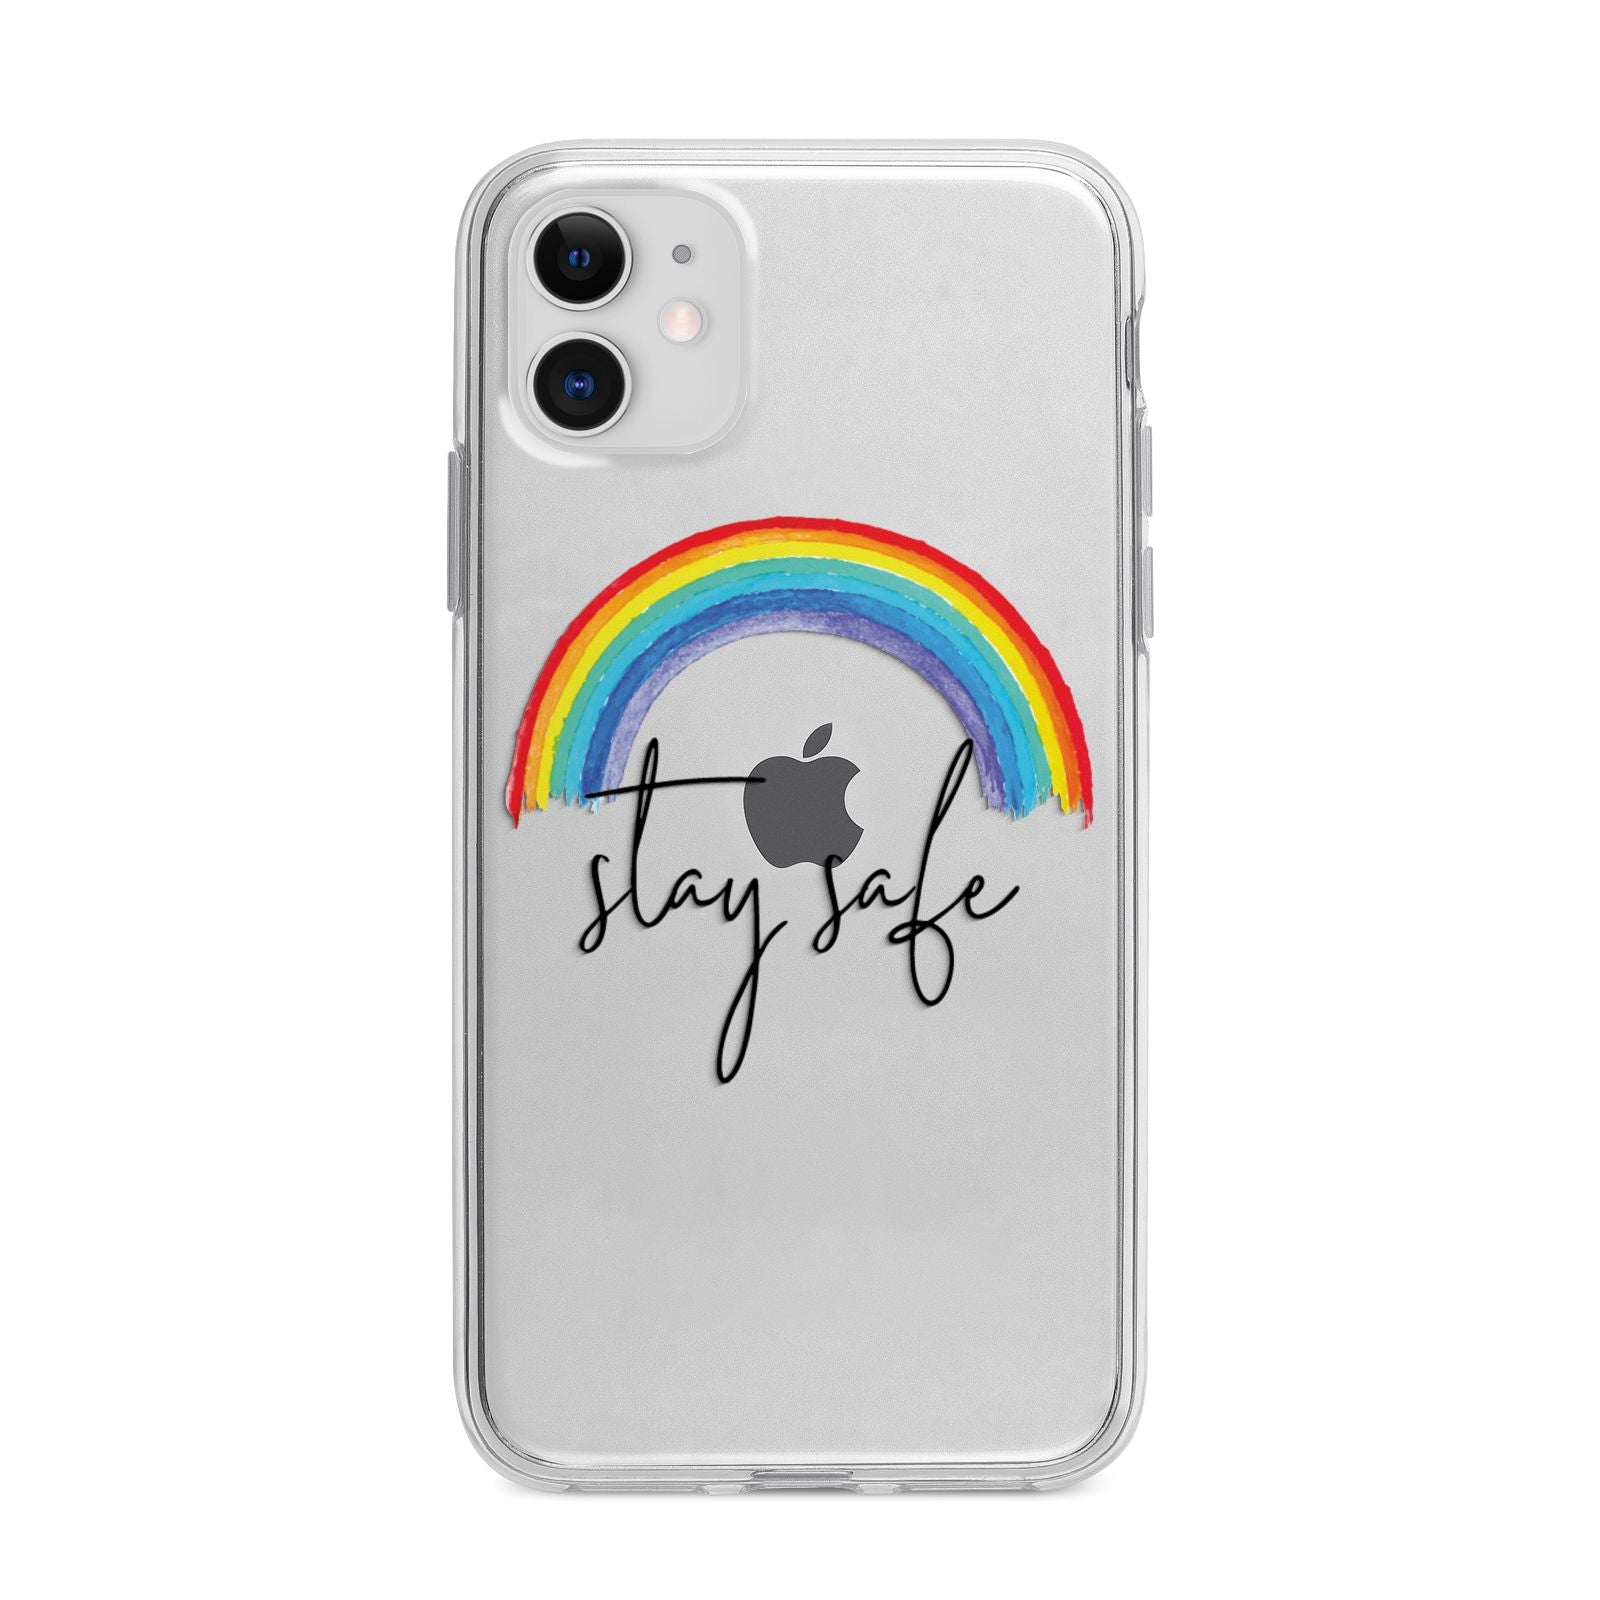 Stay Safe Rainbow Apple iPhone 11 in White with Bumper Case